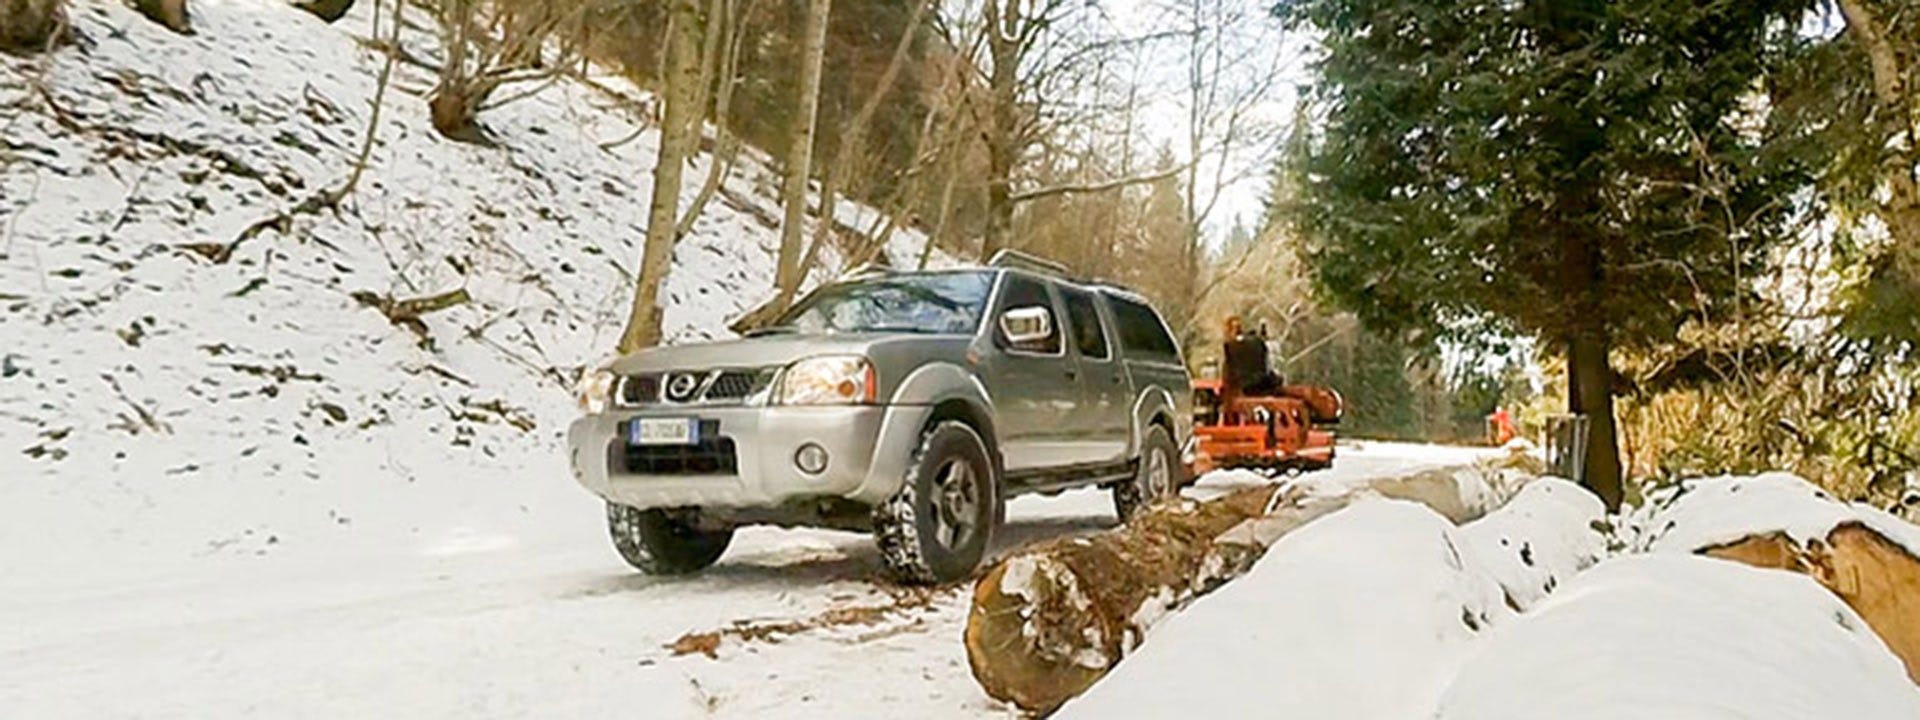 Brothers Geronazzo operate a mobile sawmill business in Northern Italy